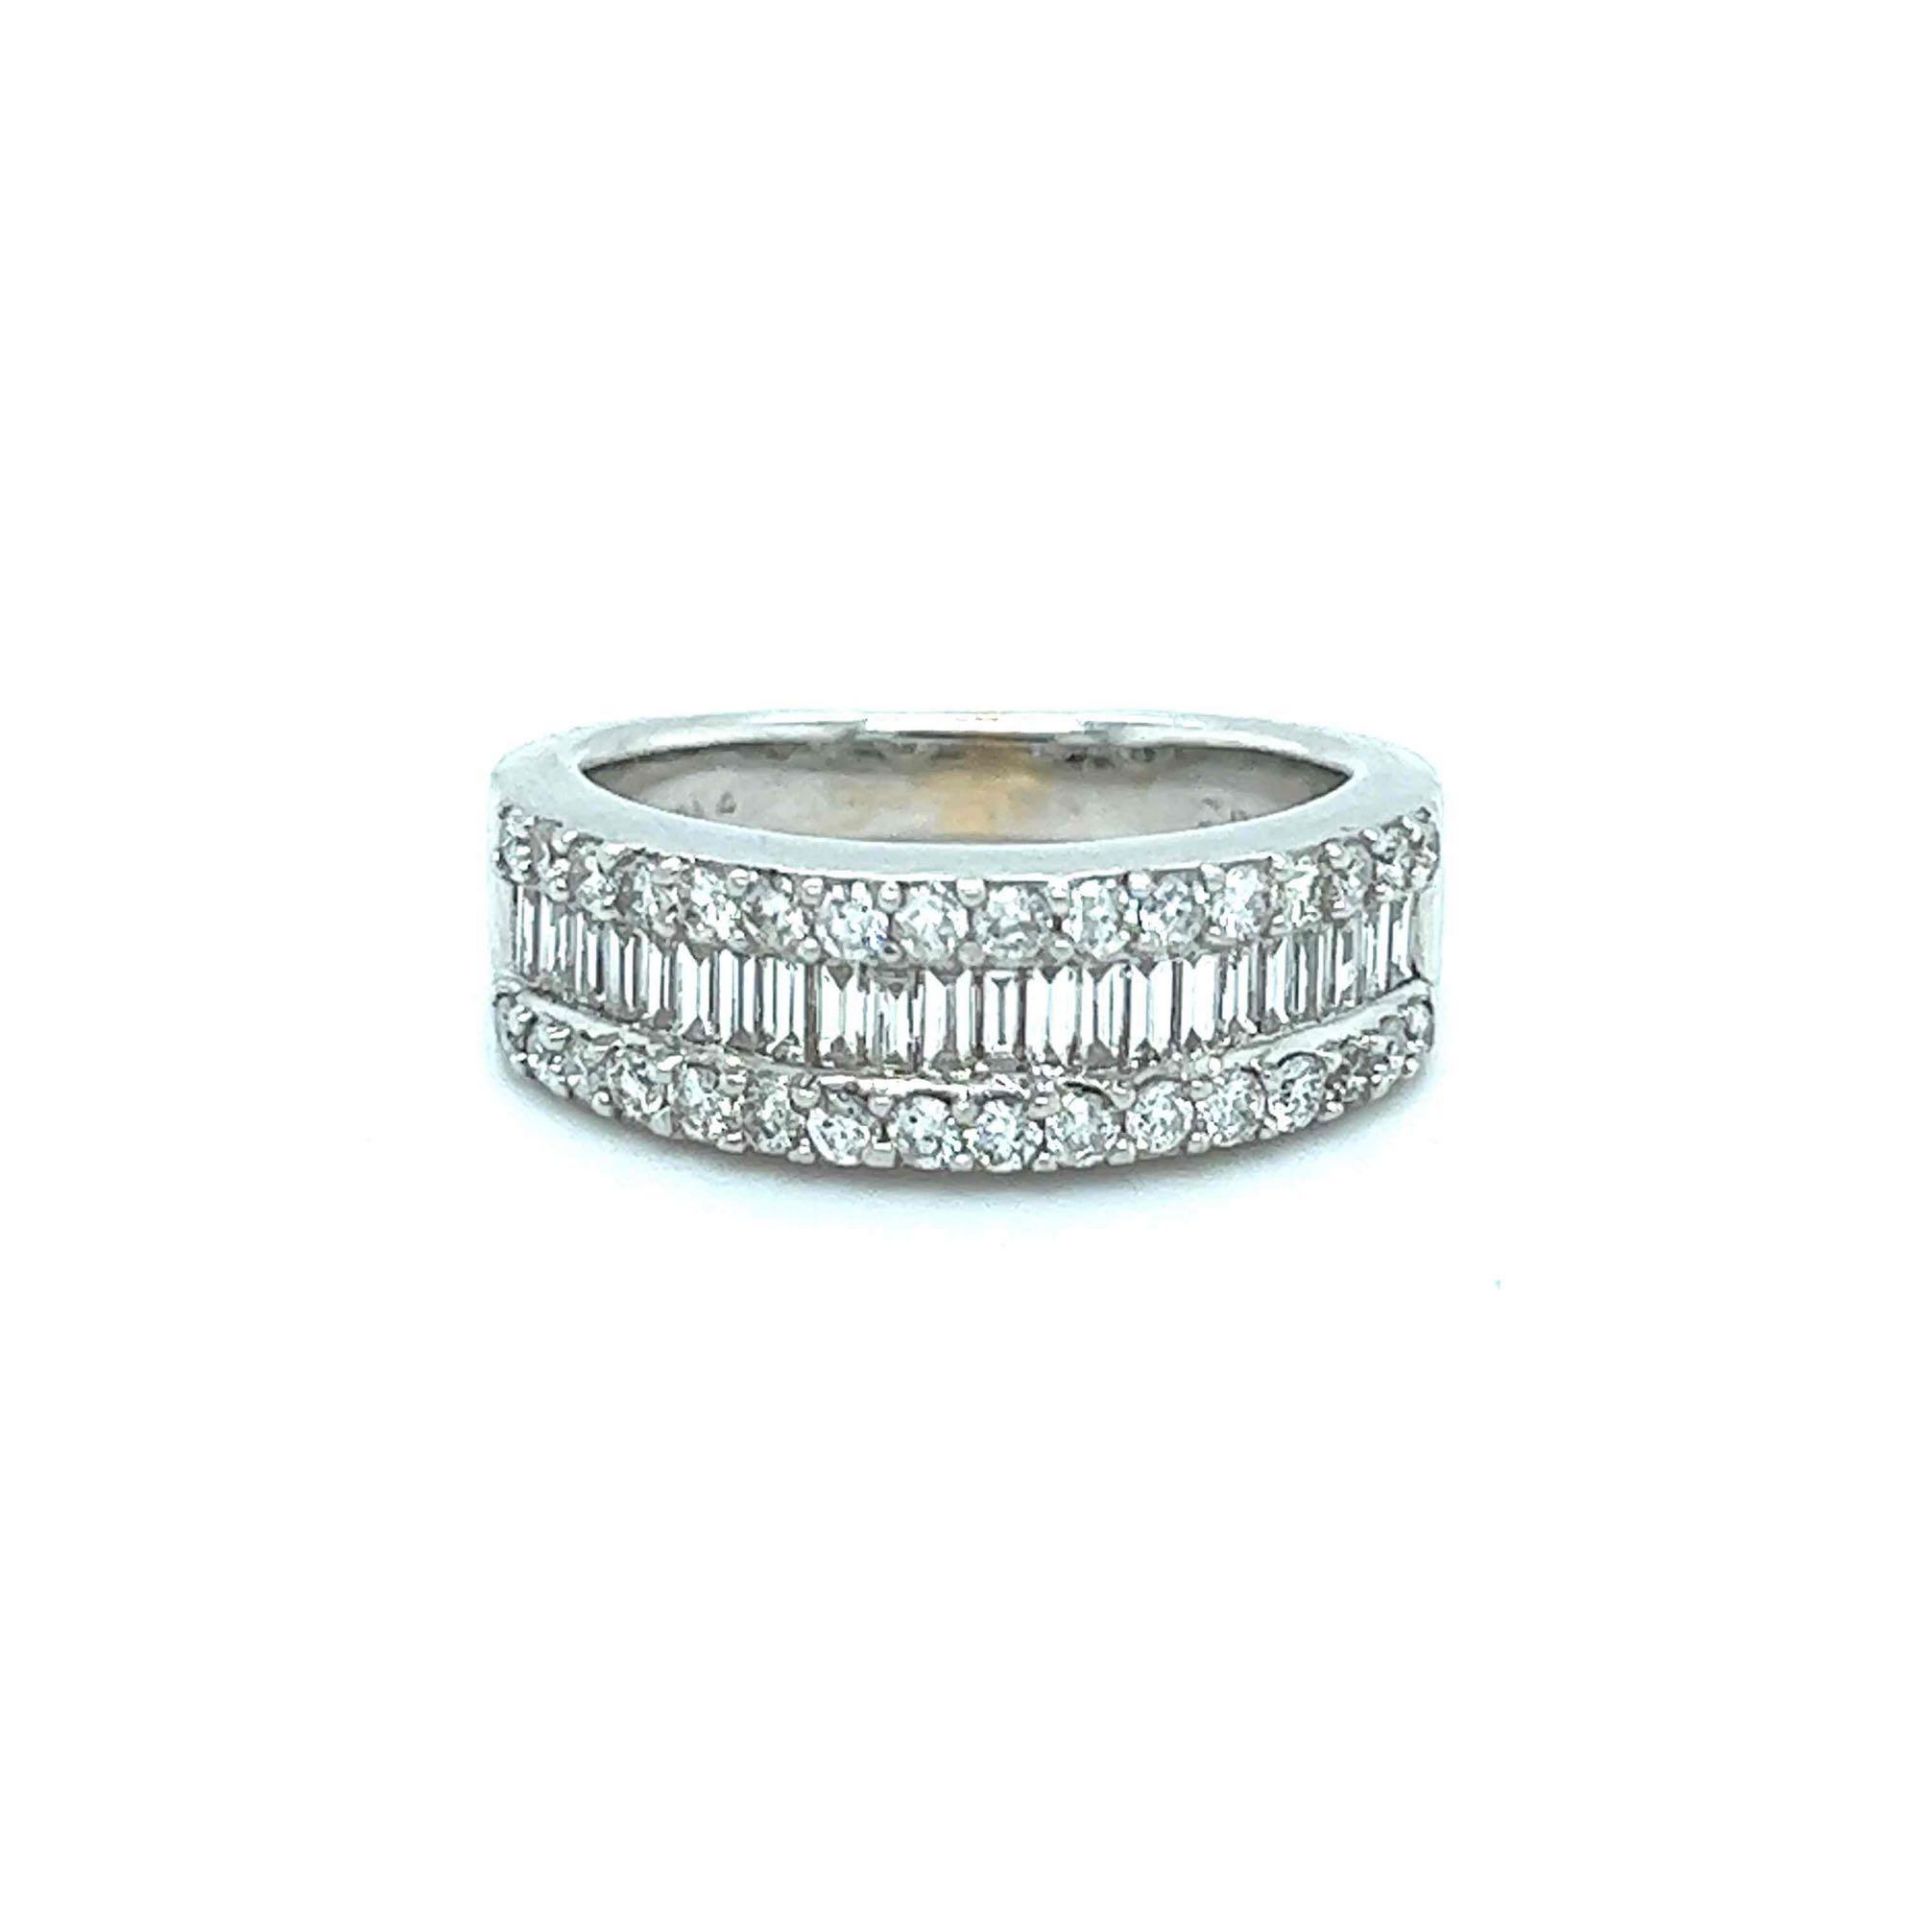 ESTATE BAGUETTE AND ROUND DIAMOND RING 18K WHITE GOLD